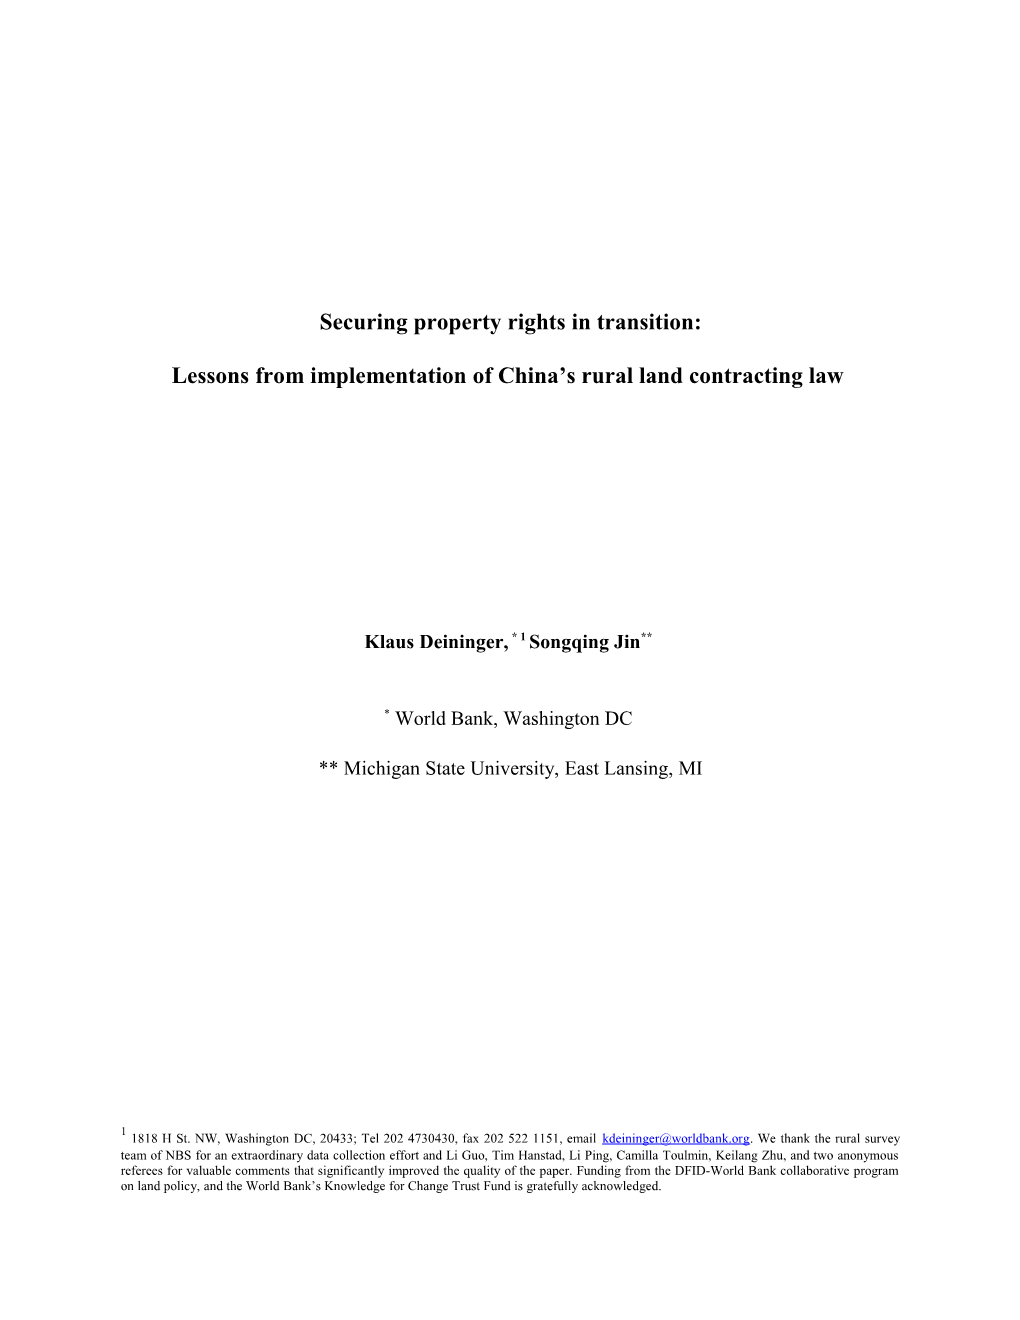 Securing Property Rights in Transition